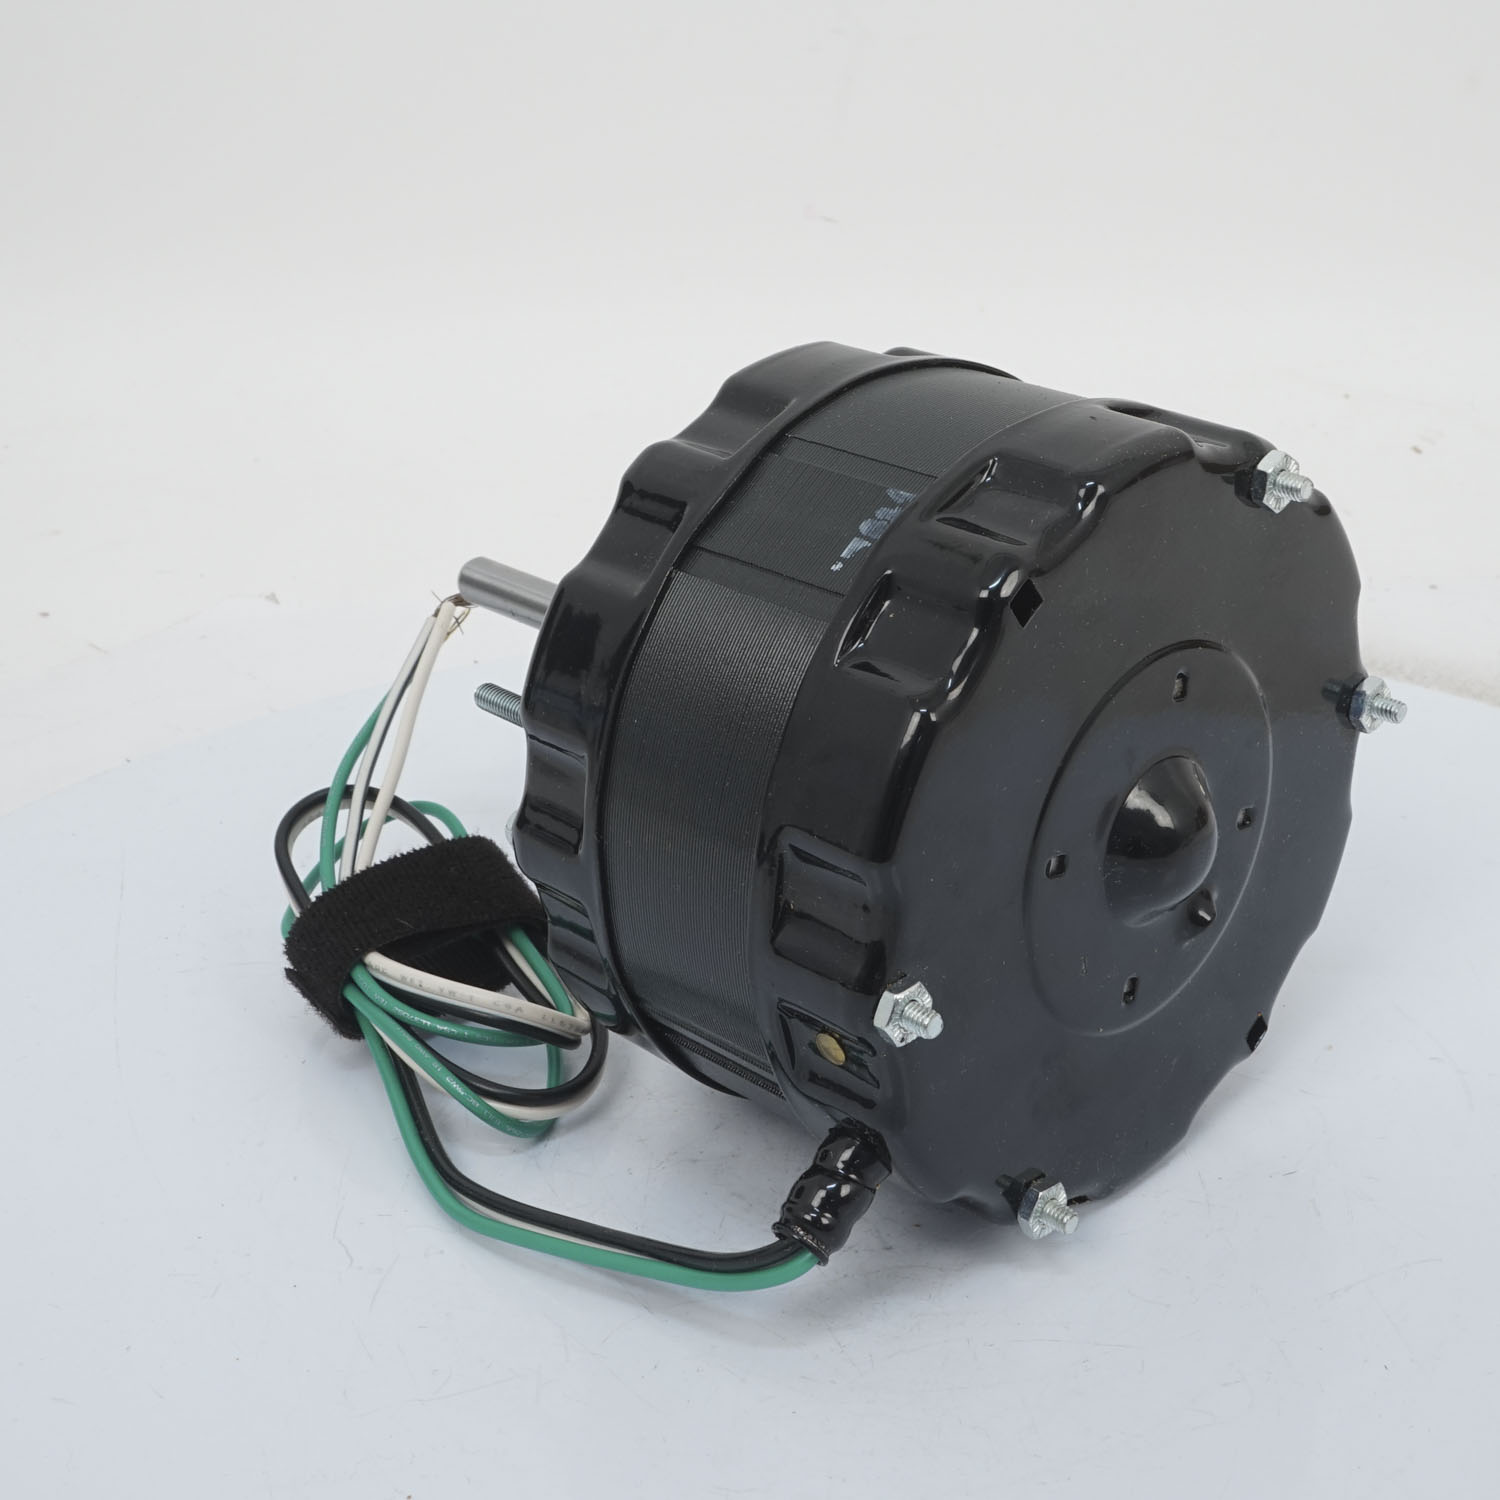 Motor Lüfter 12V / 3200RPM ; 44-8526 (M7135) replacement